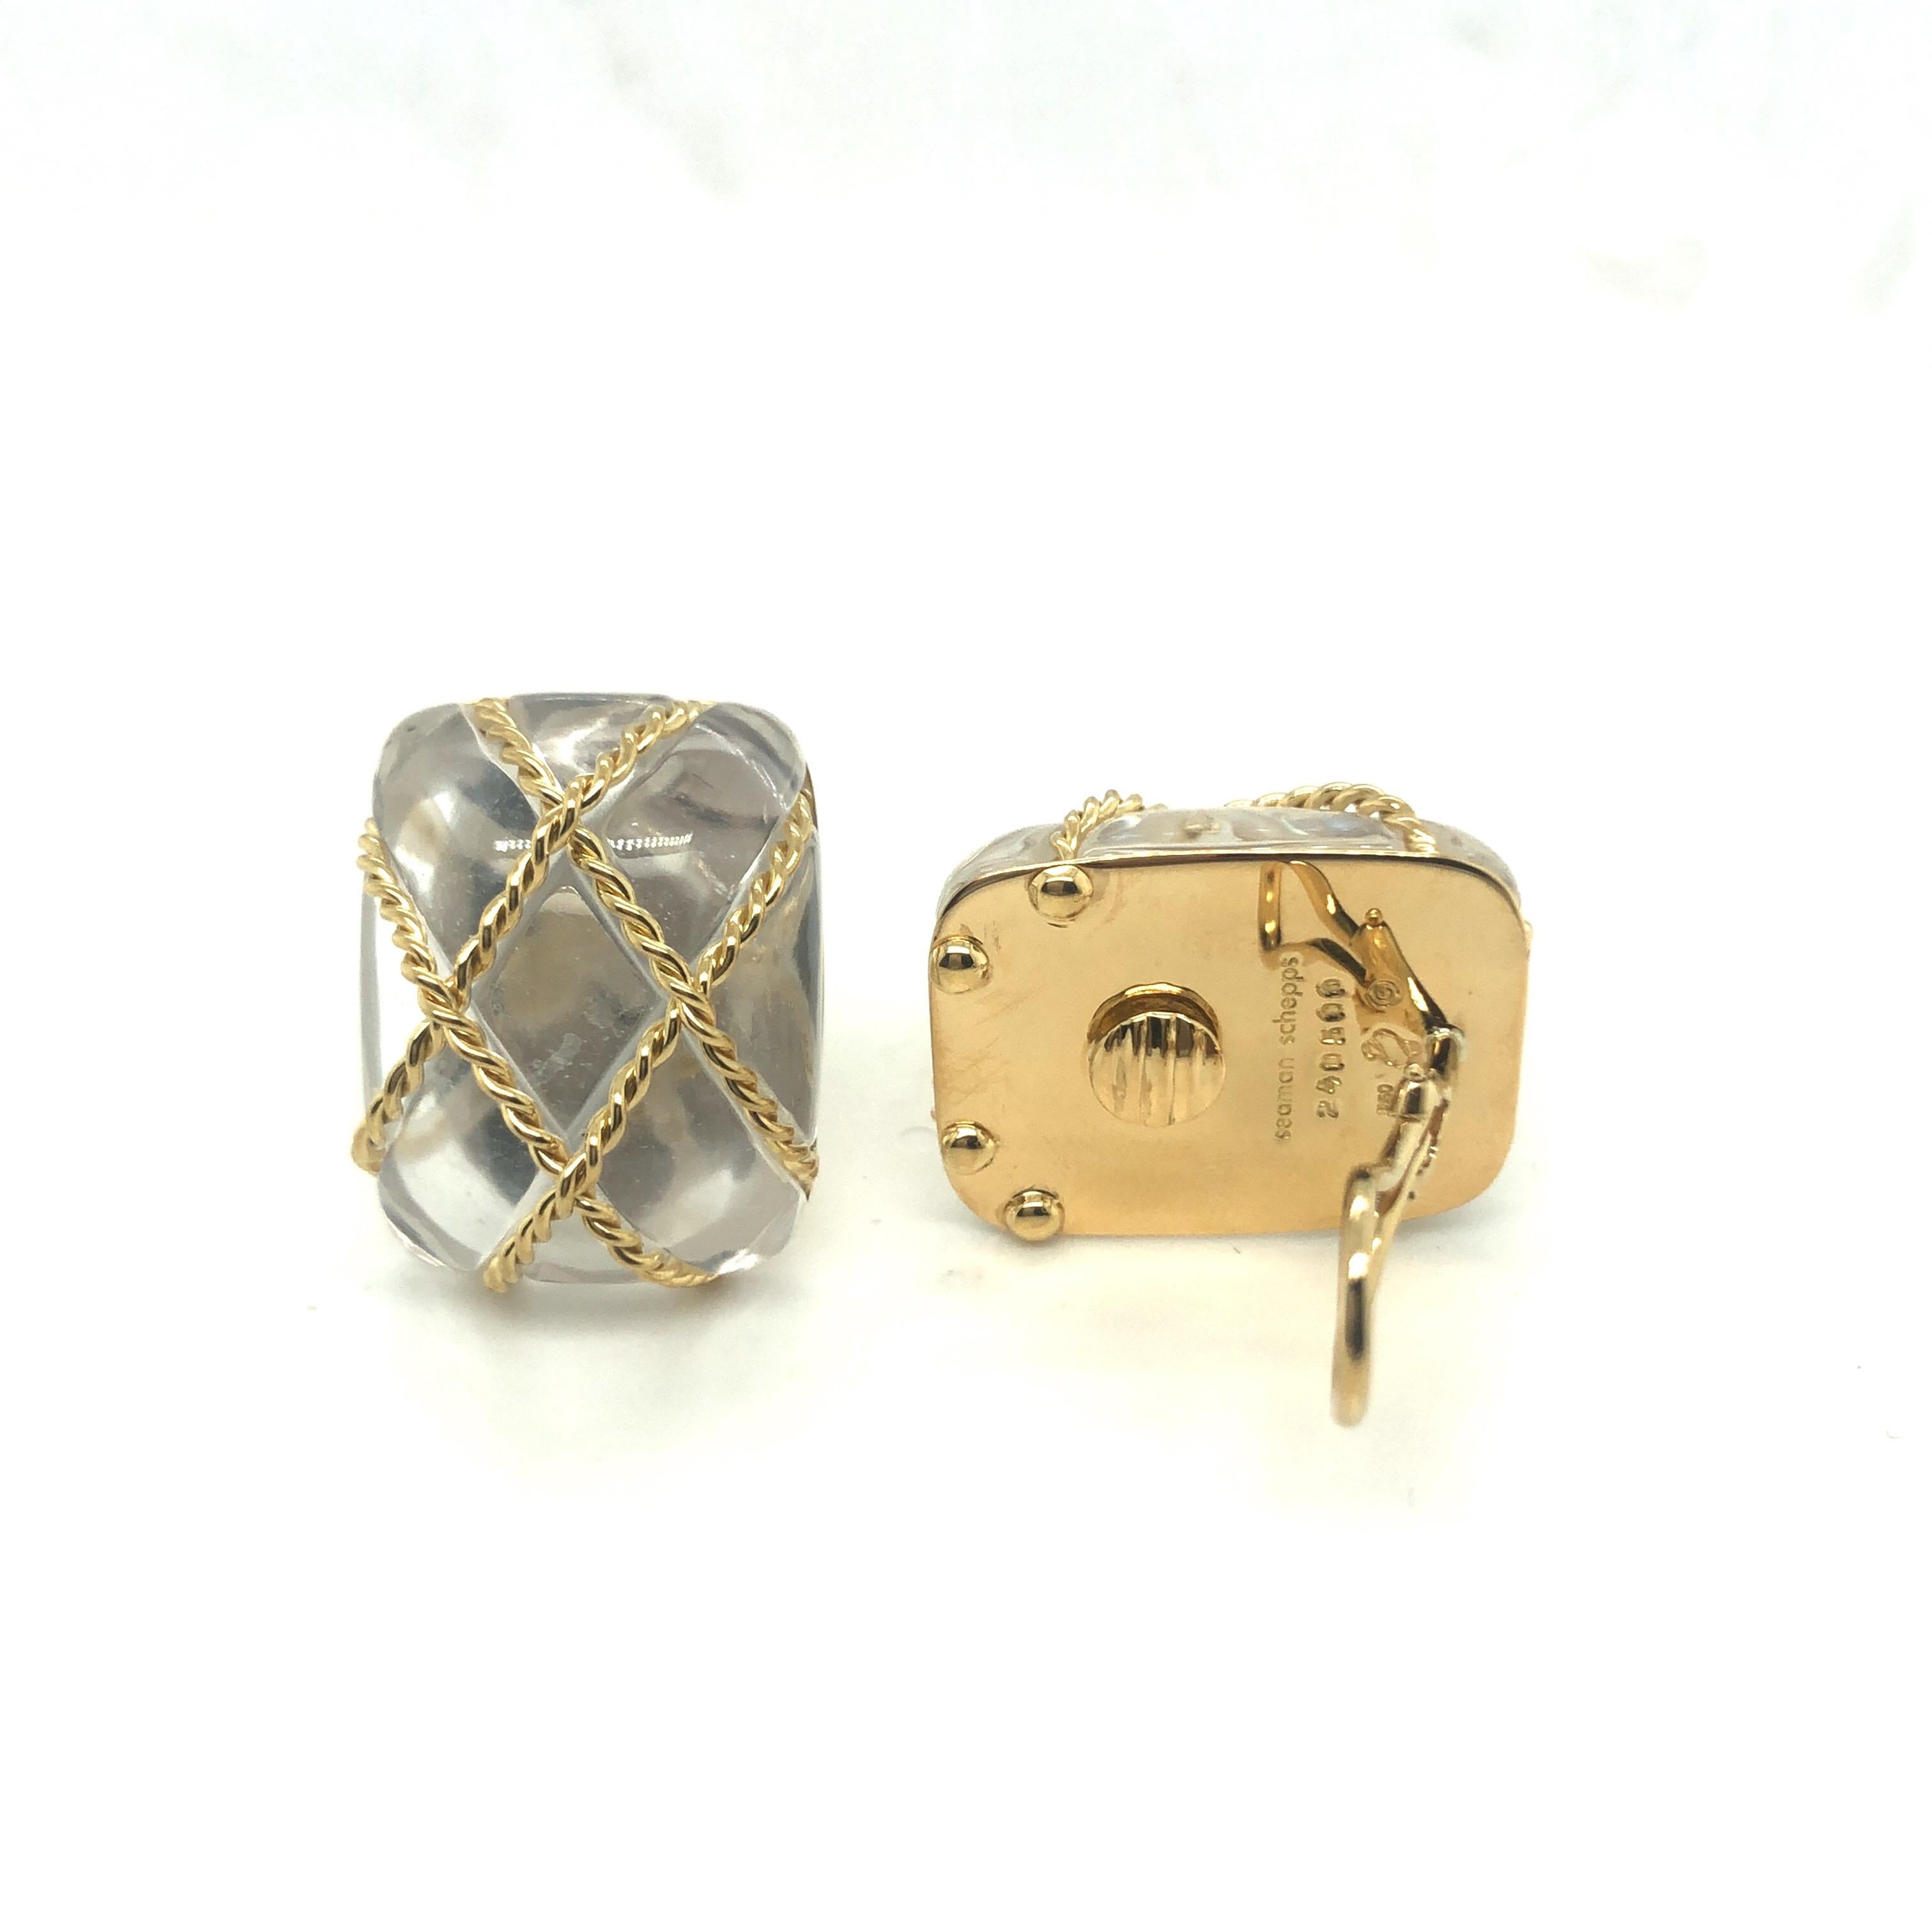 Cabochon 18 Karat Yellow Gold and Rock Crystal Cage Earrings by Seaman Schepps